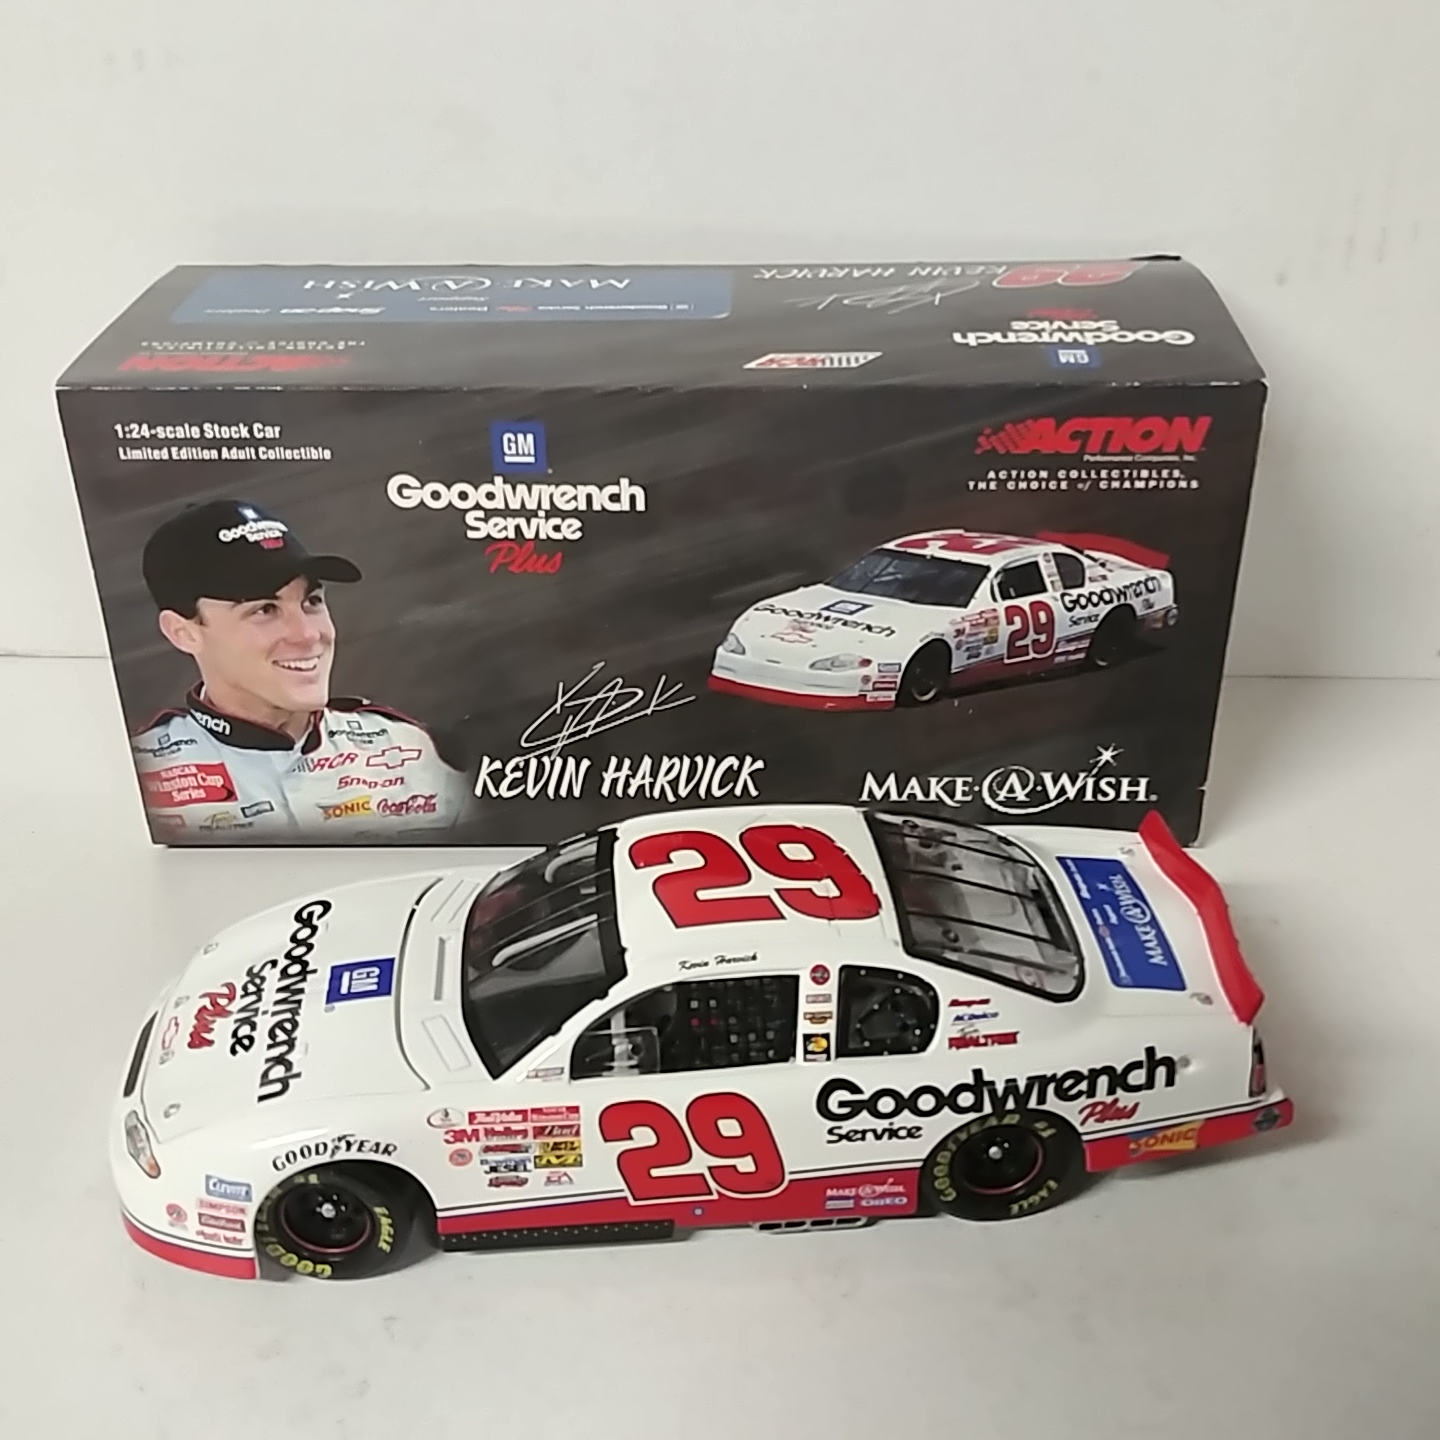 2001 Kevin Harvick1/24th GM Goodwrench "Make A Wish" c/w bank car